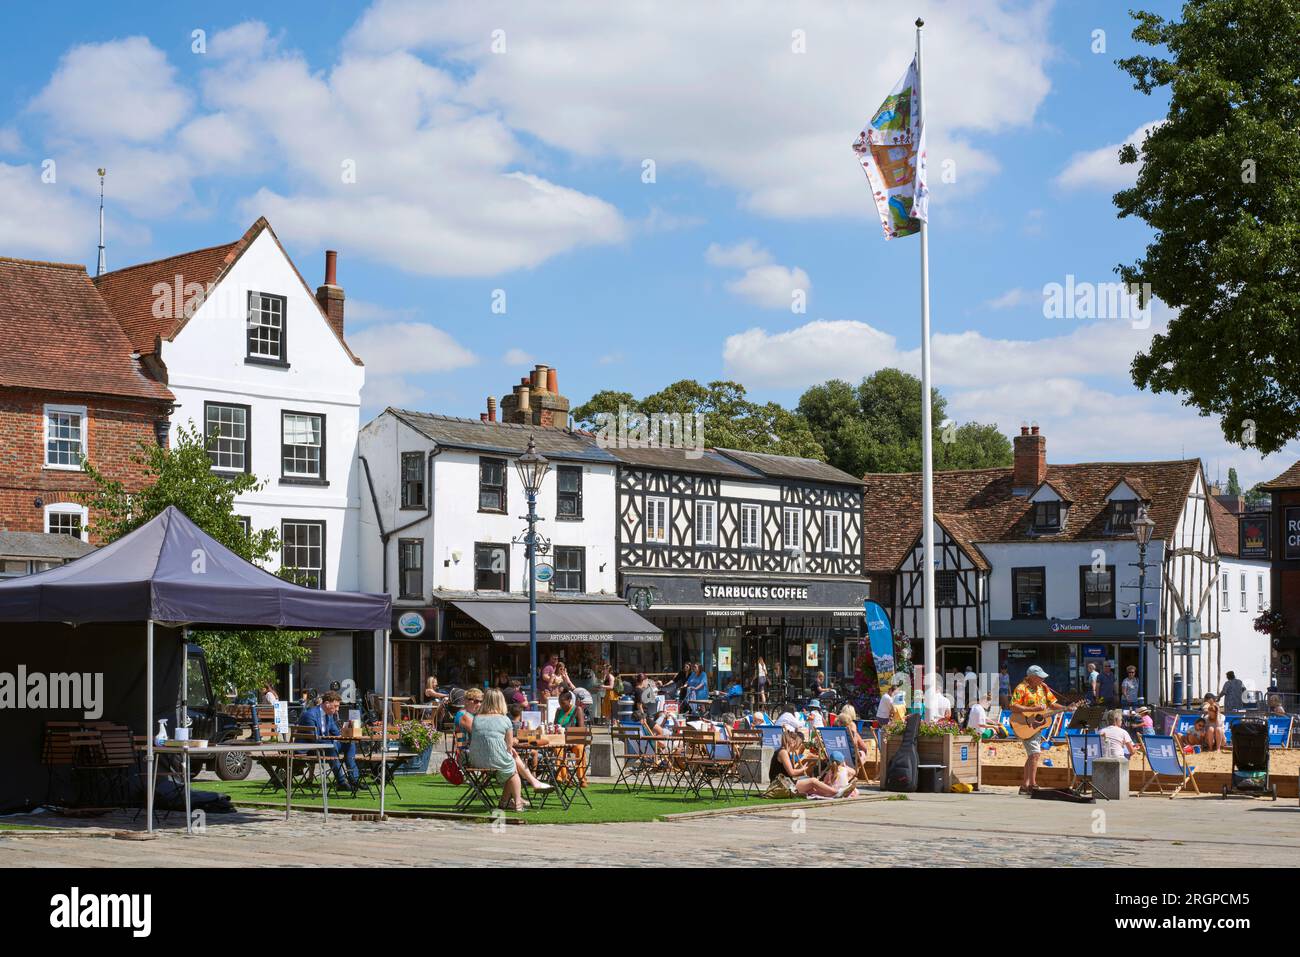 Old buildings and people sitting outside at Market Place, Hitchin, Hertfordshire, UK, in summertime Stock Photo